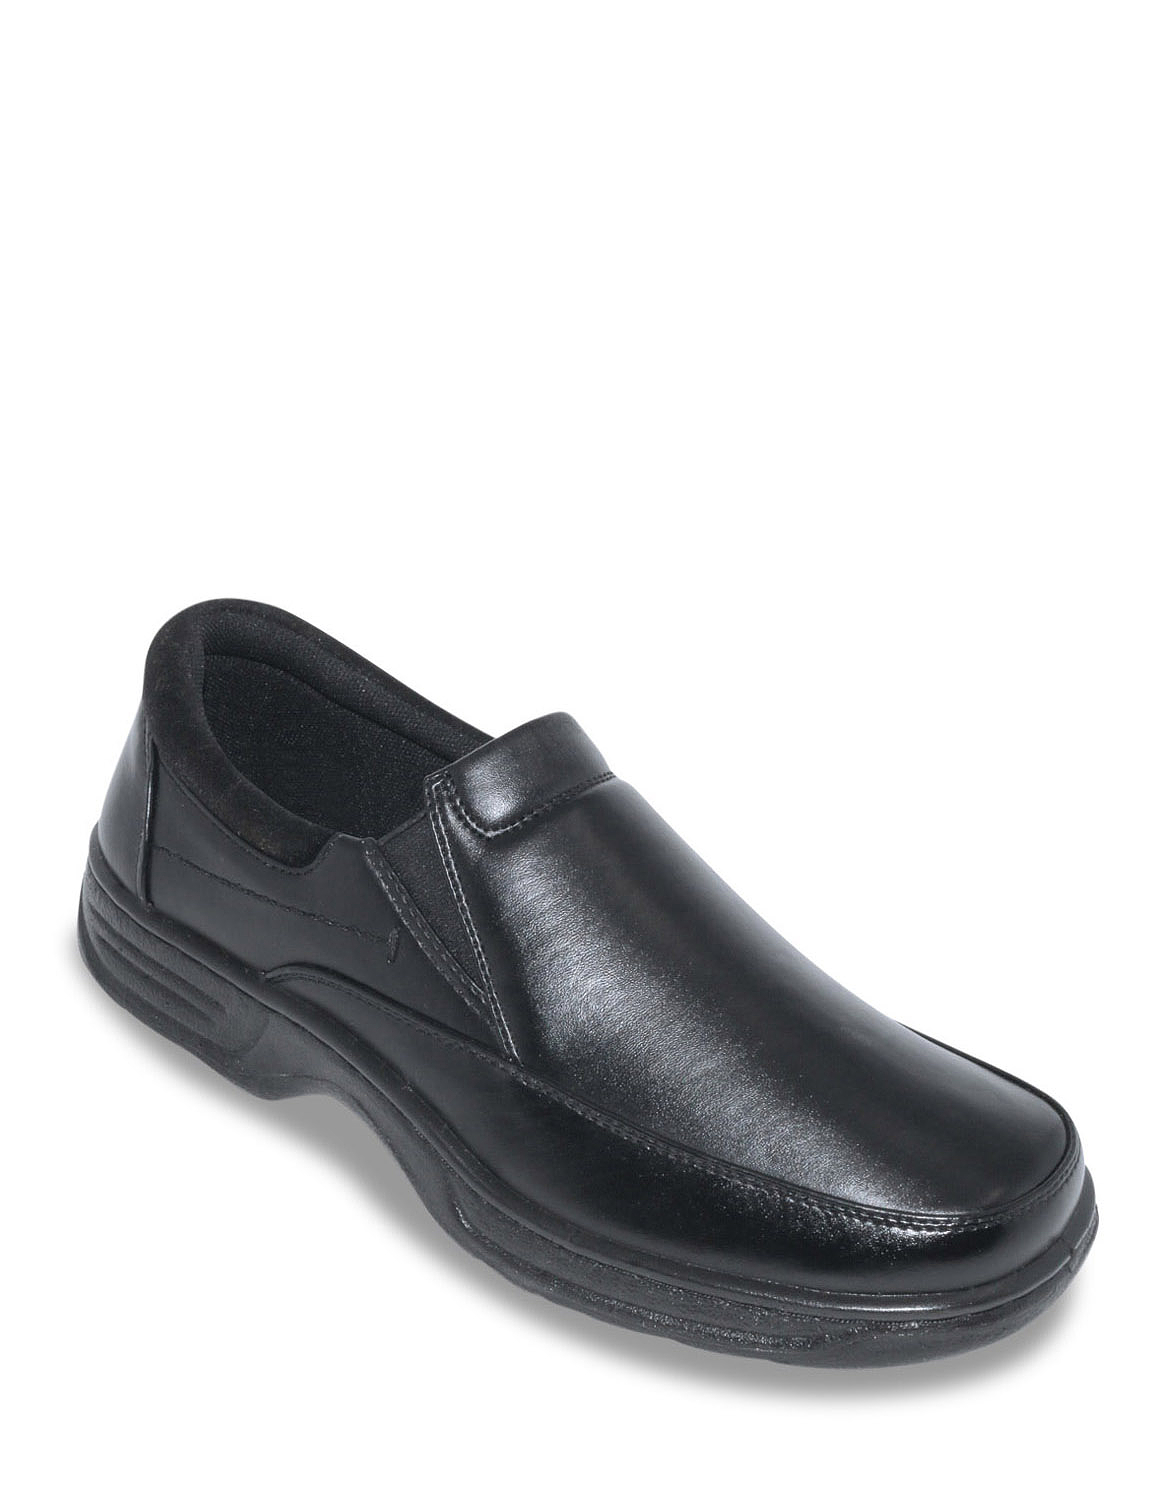 slip on wide fit shoes